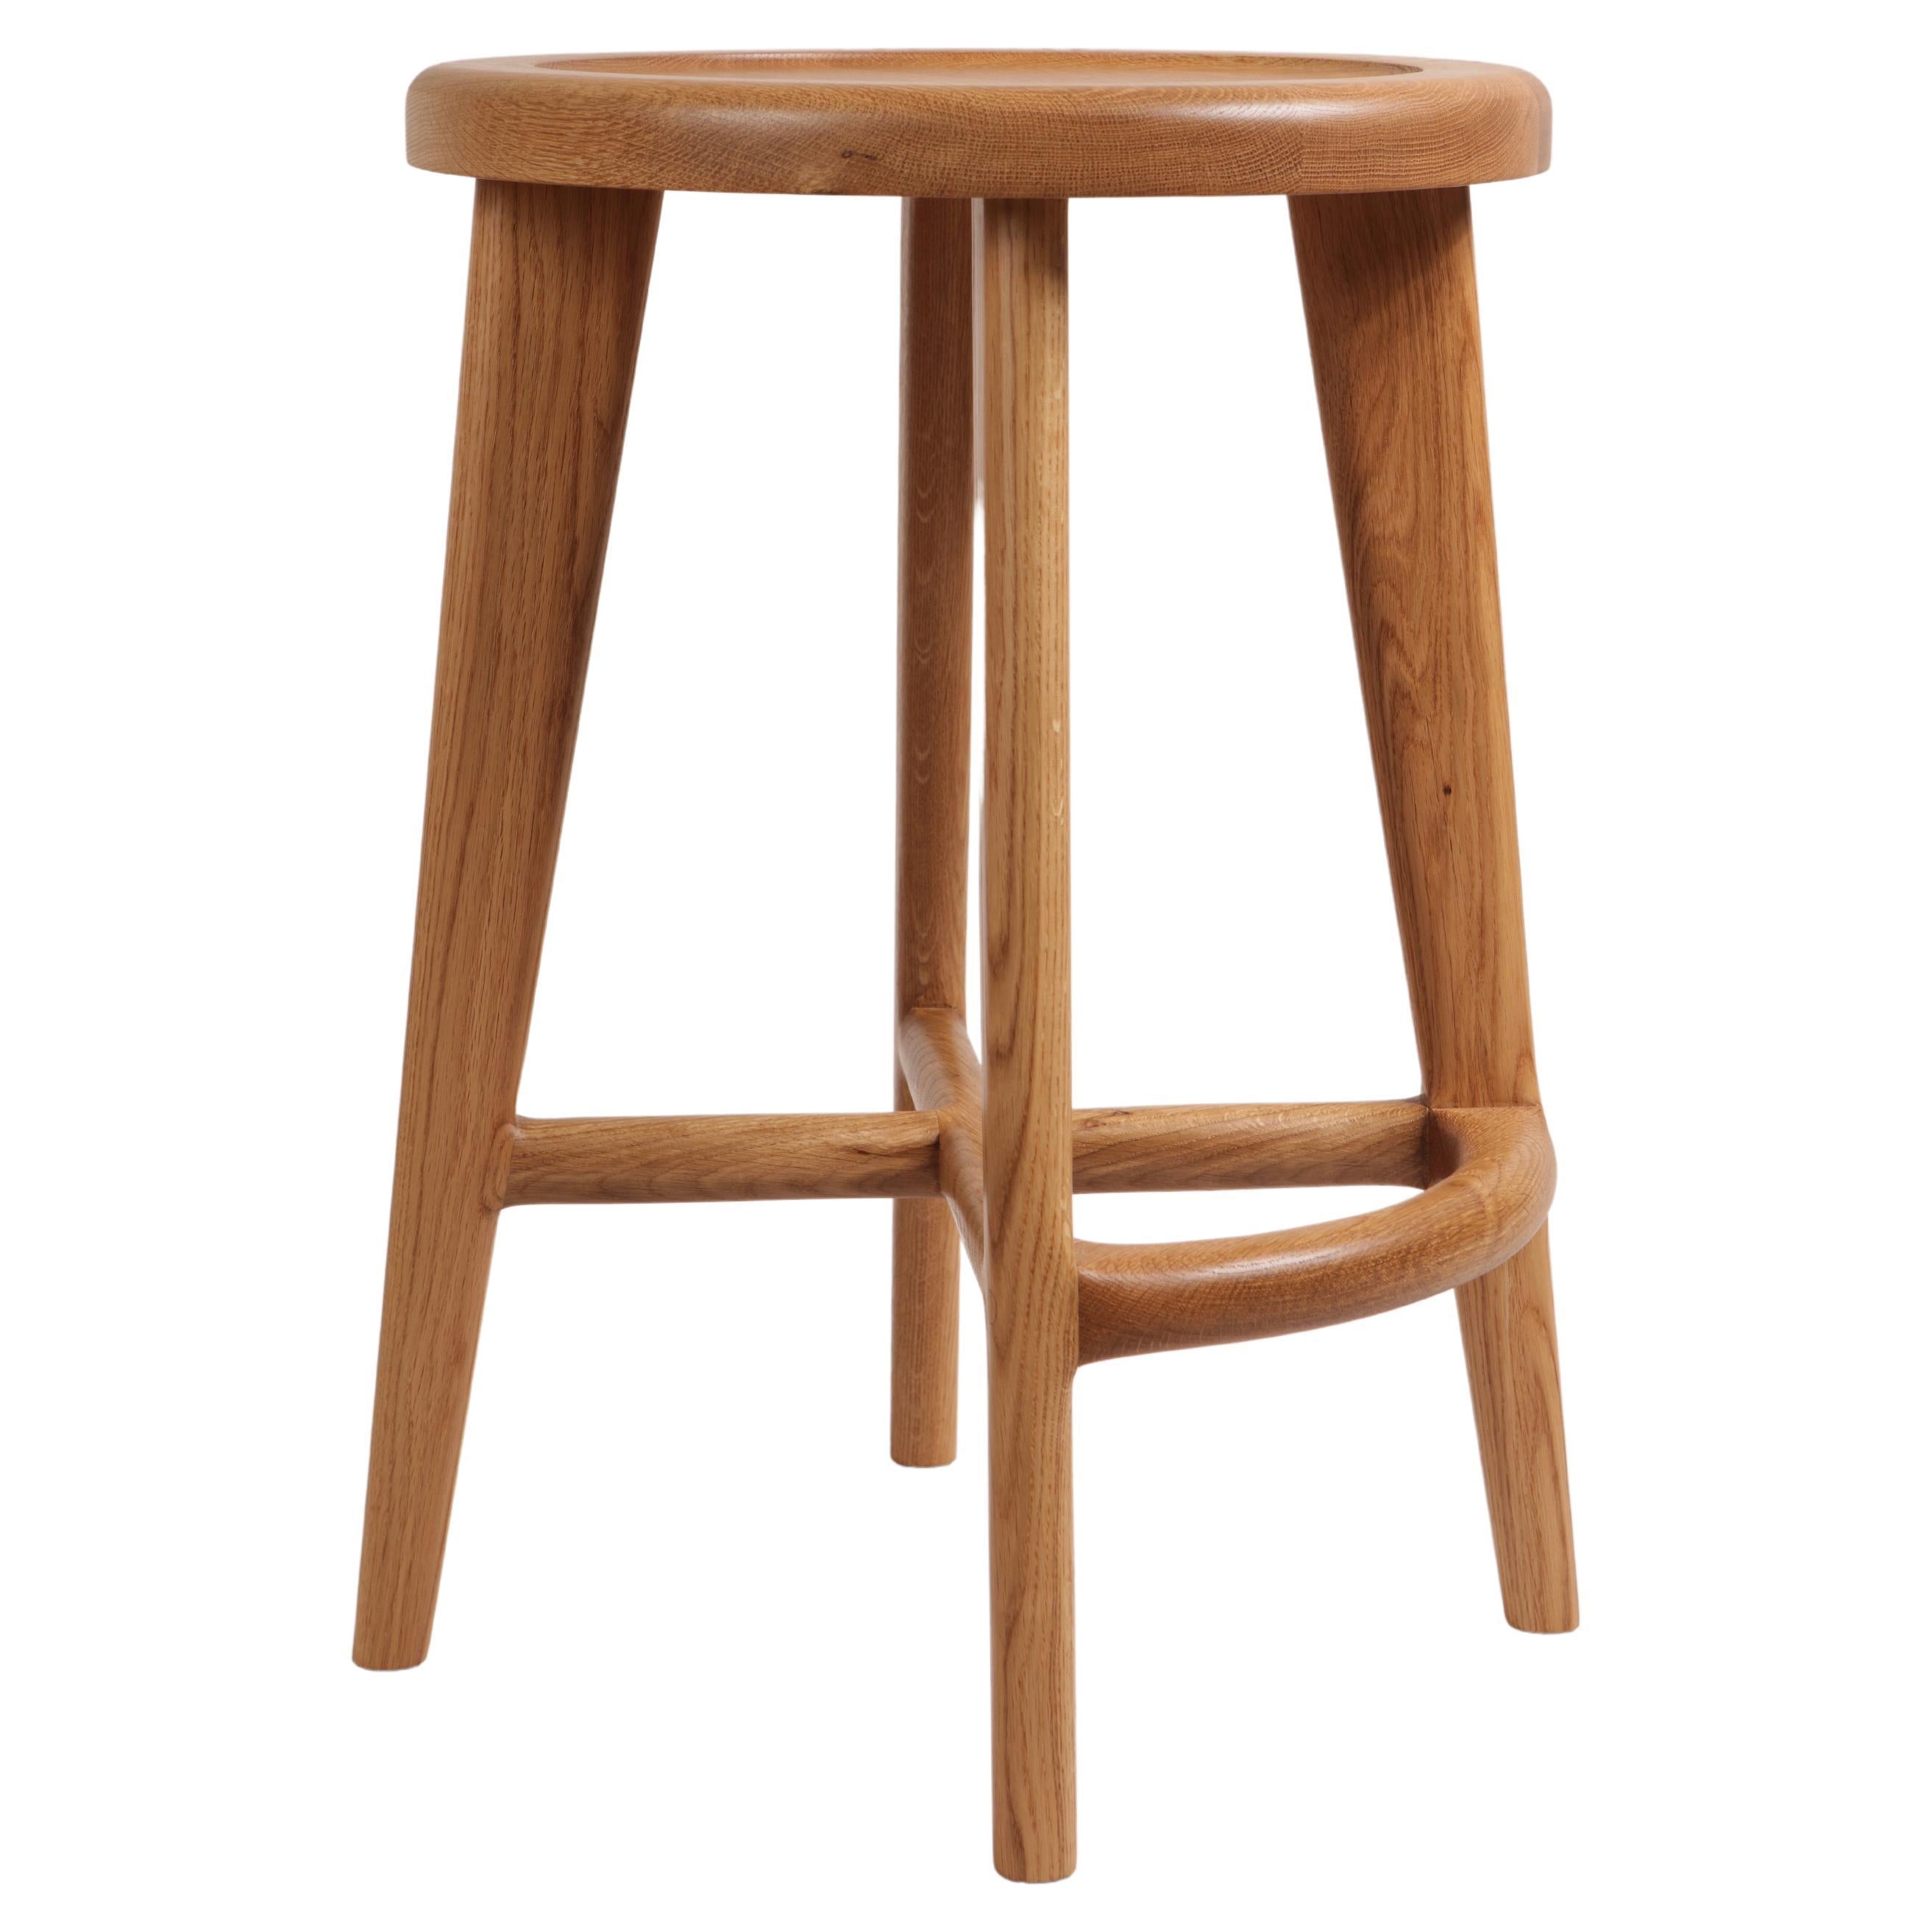 Handcrafted Solid Wood Bar or Counter Stool, White Oak